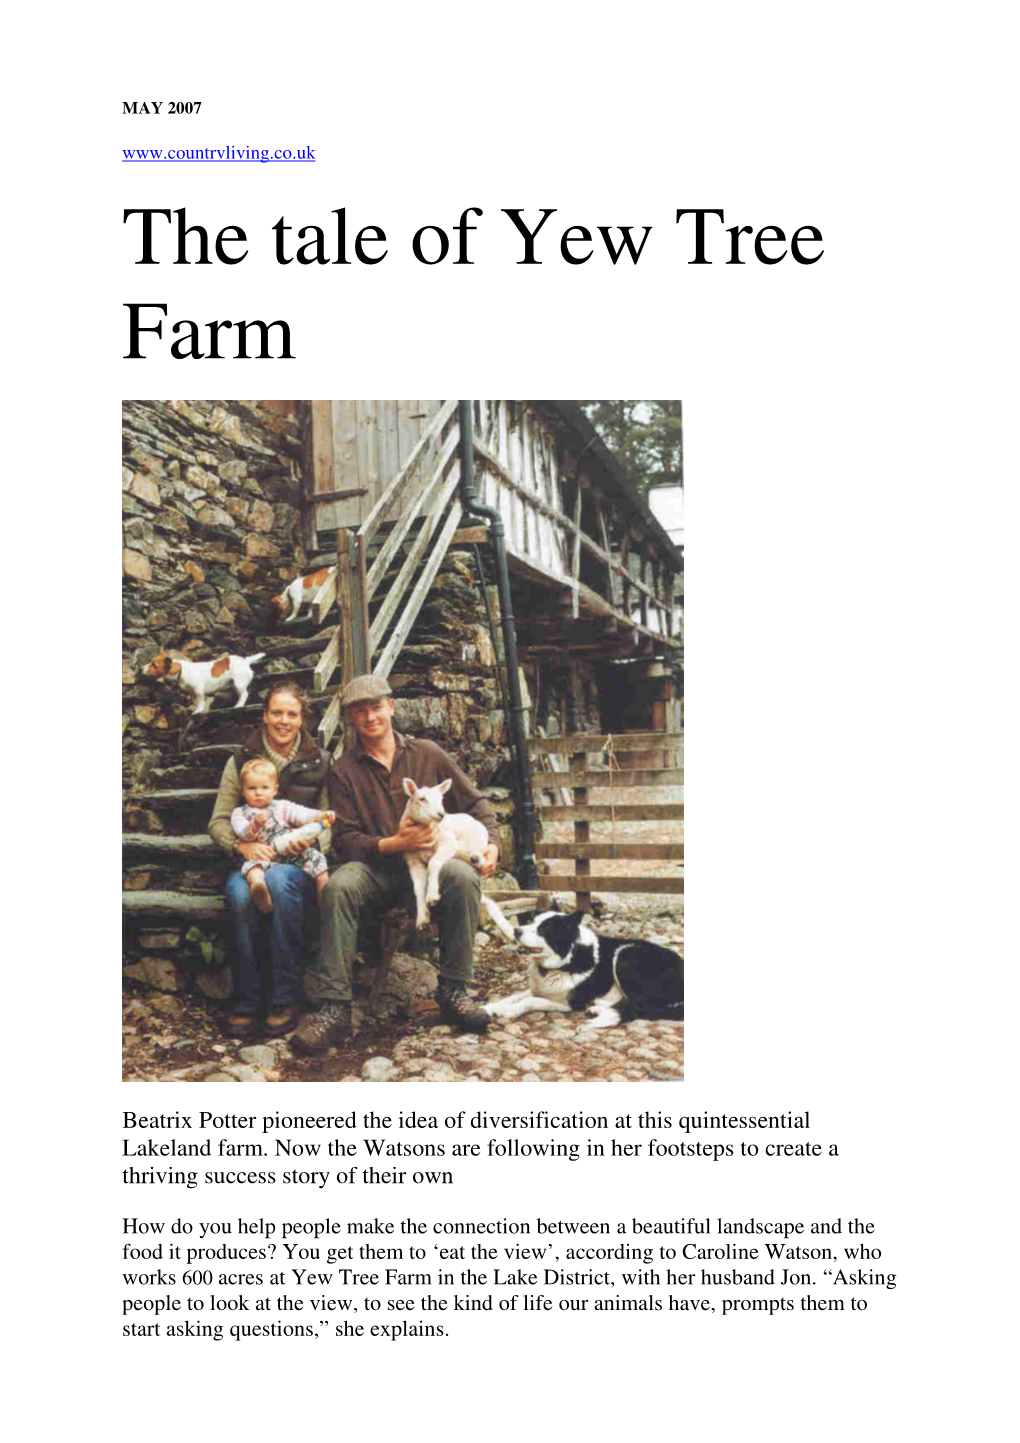 The Tale of Yew Tree Farm